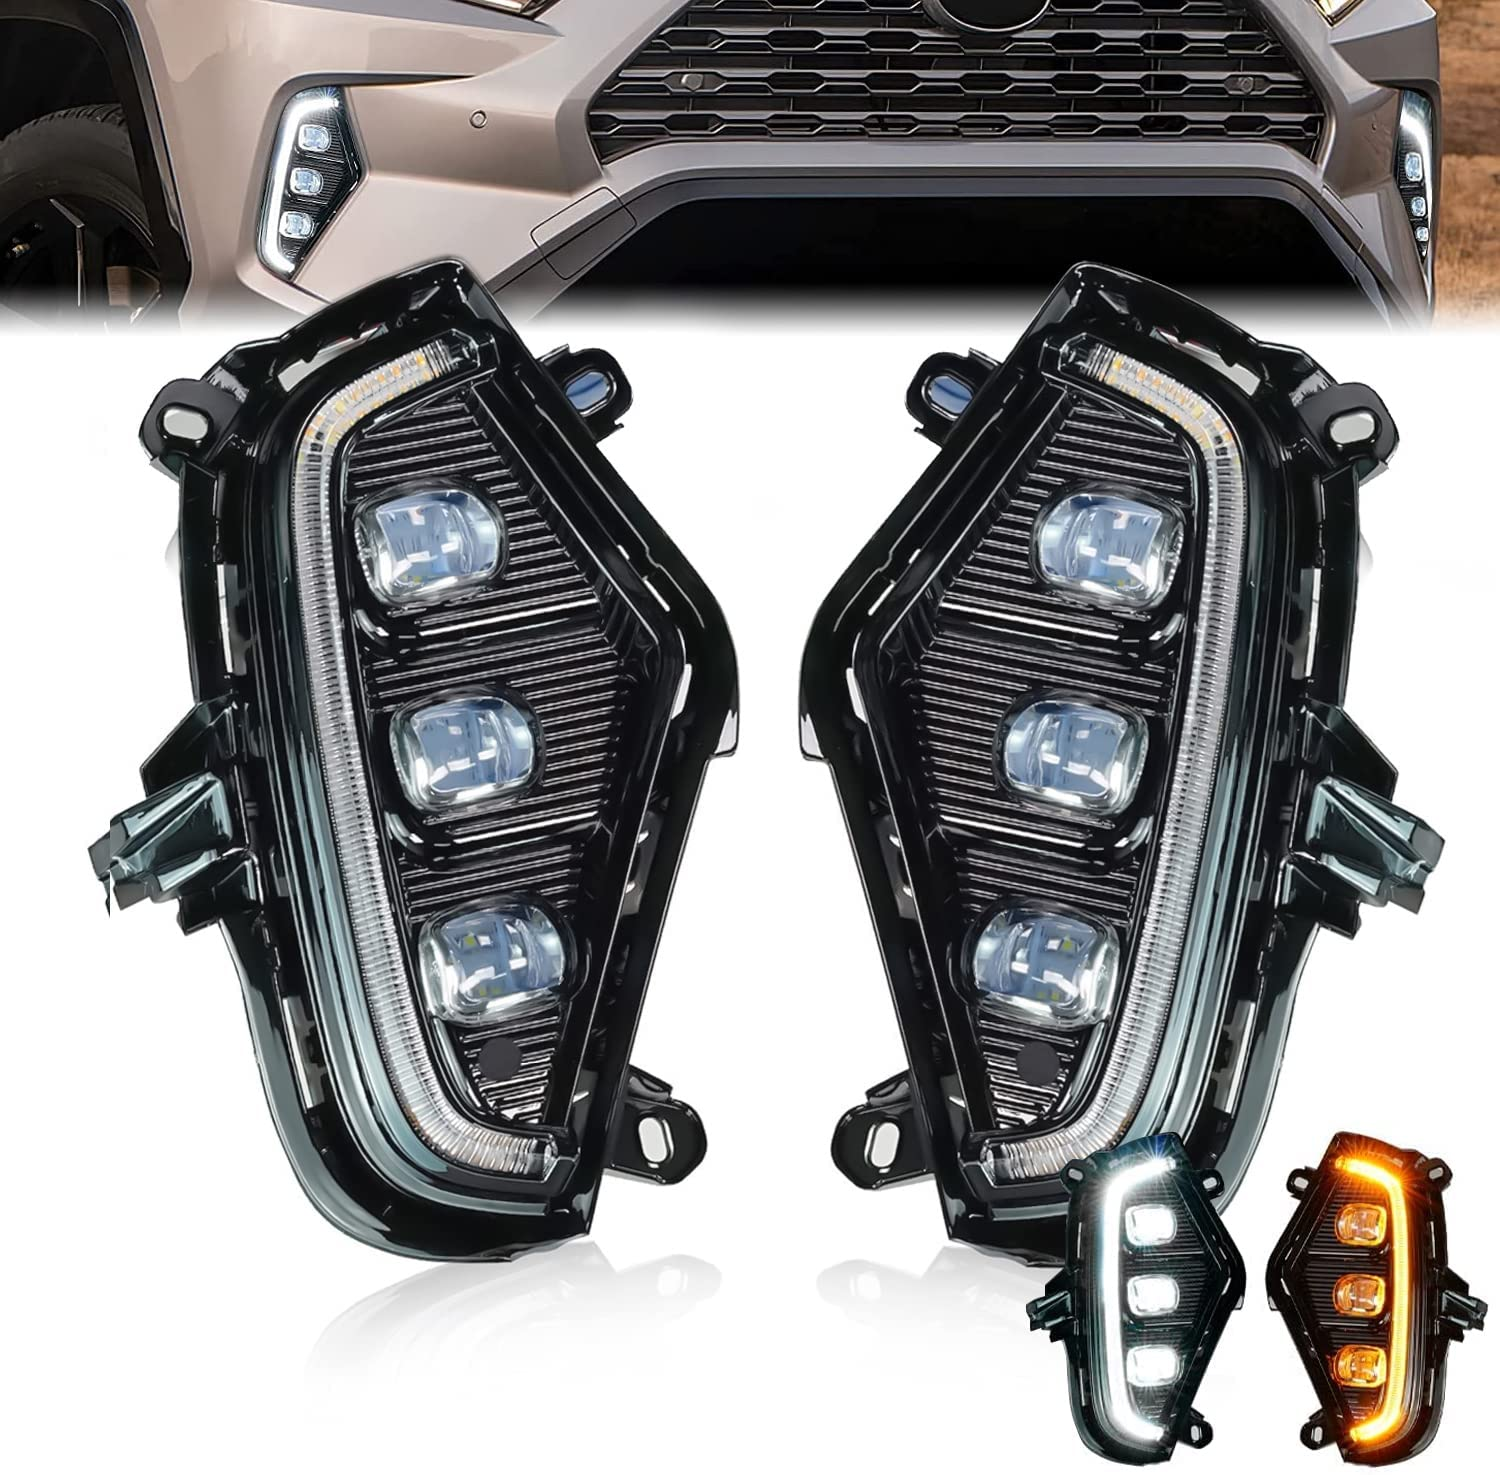 HW 4x4 LED DRL Lights Fog Lights with Amber Turn Signal Lamps 3 Eyes For Rav4 Accessories